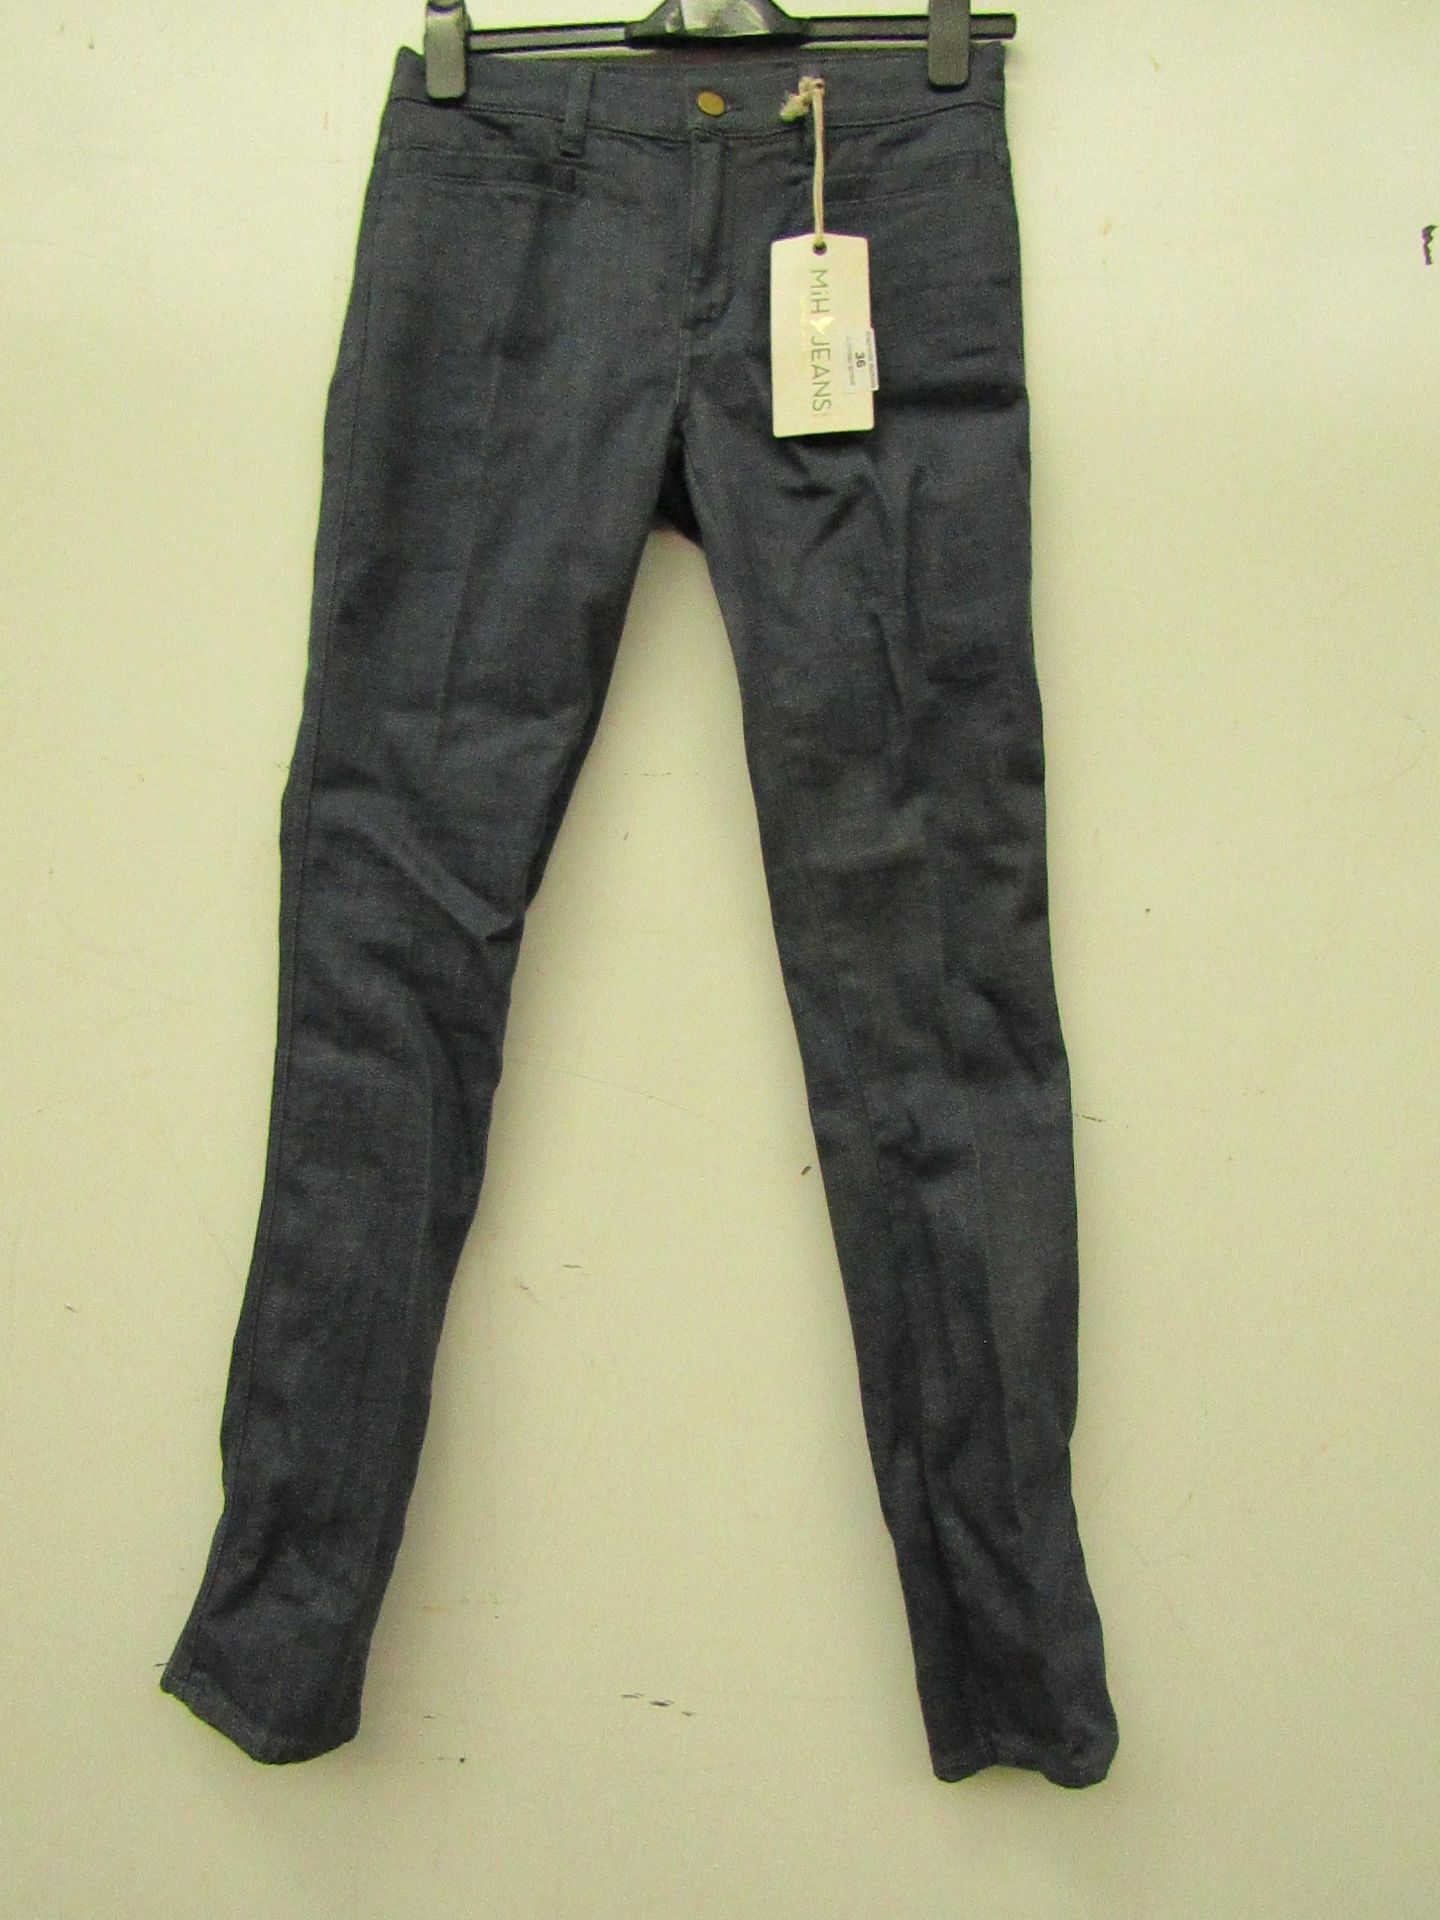 MiH organic cotton Jeans, new size 27.